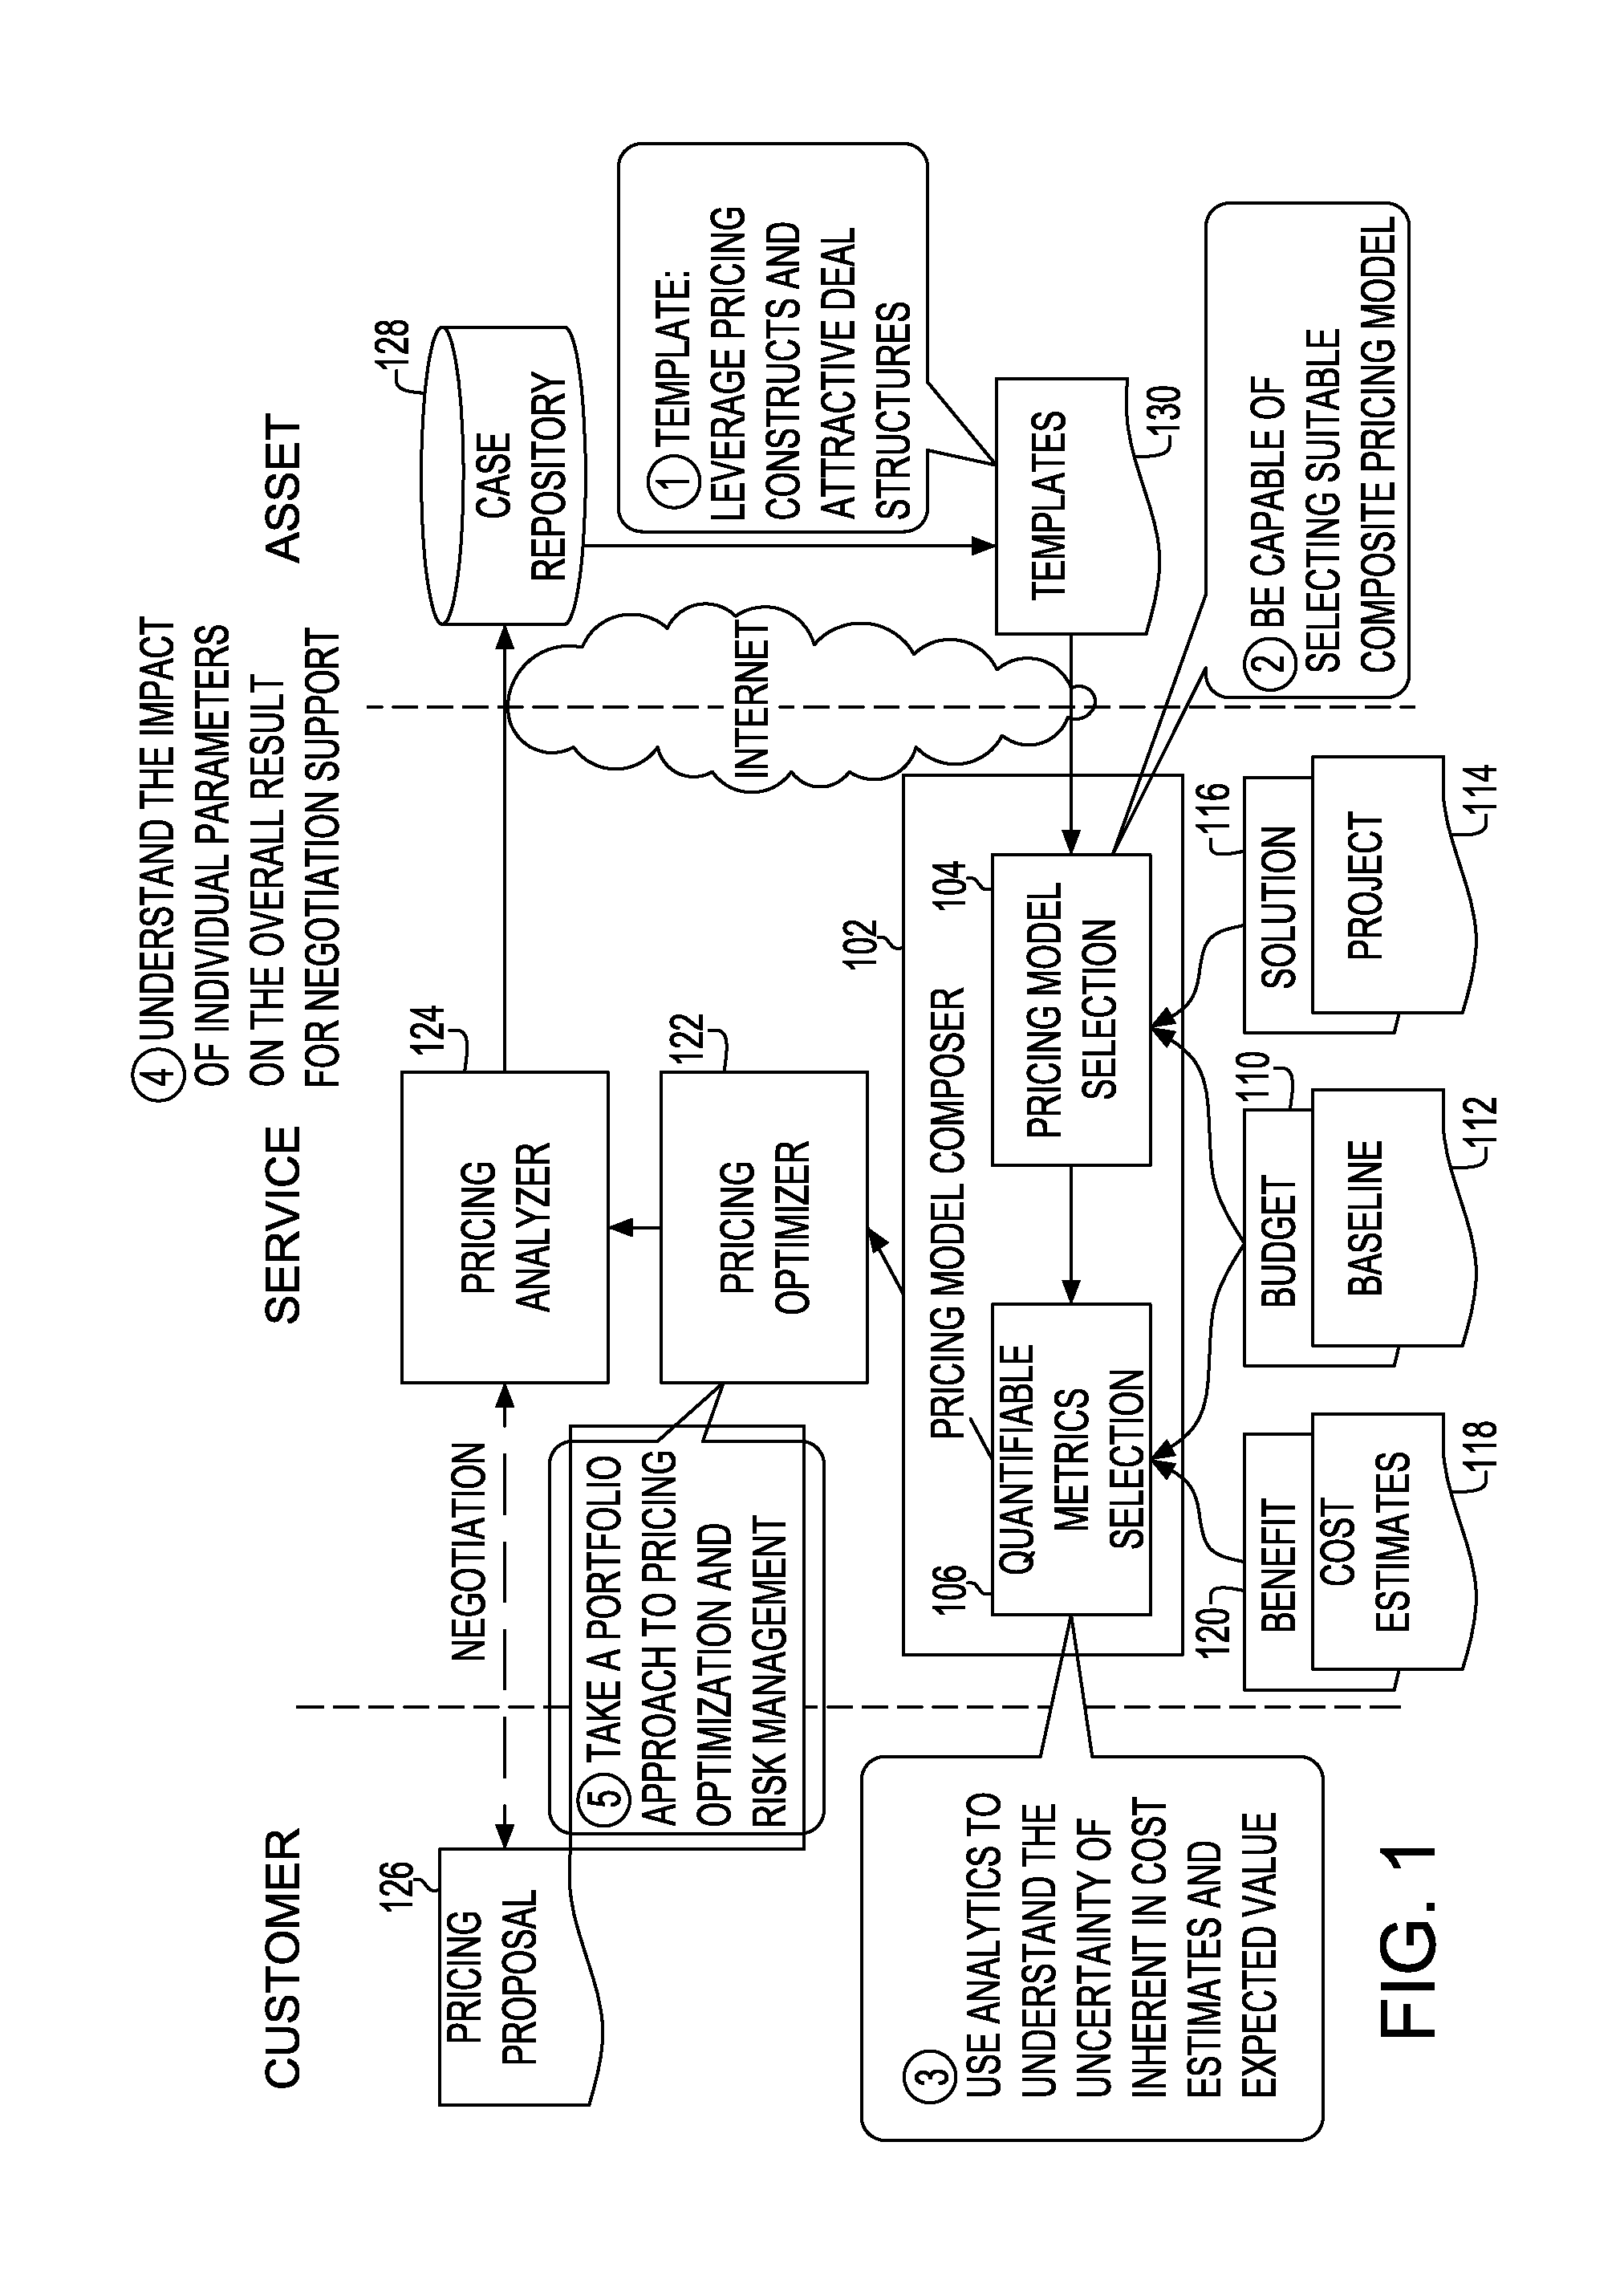 System and method for composite pricing of services to provide optimal bill schedule